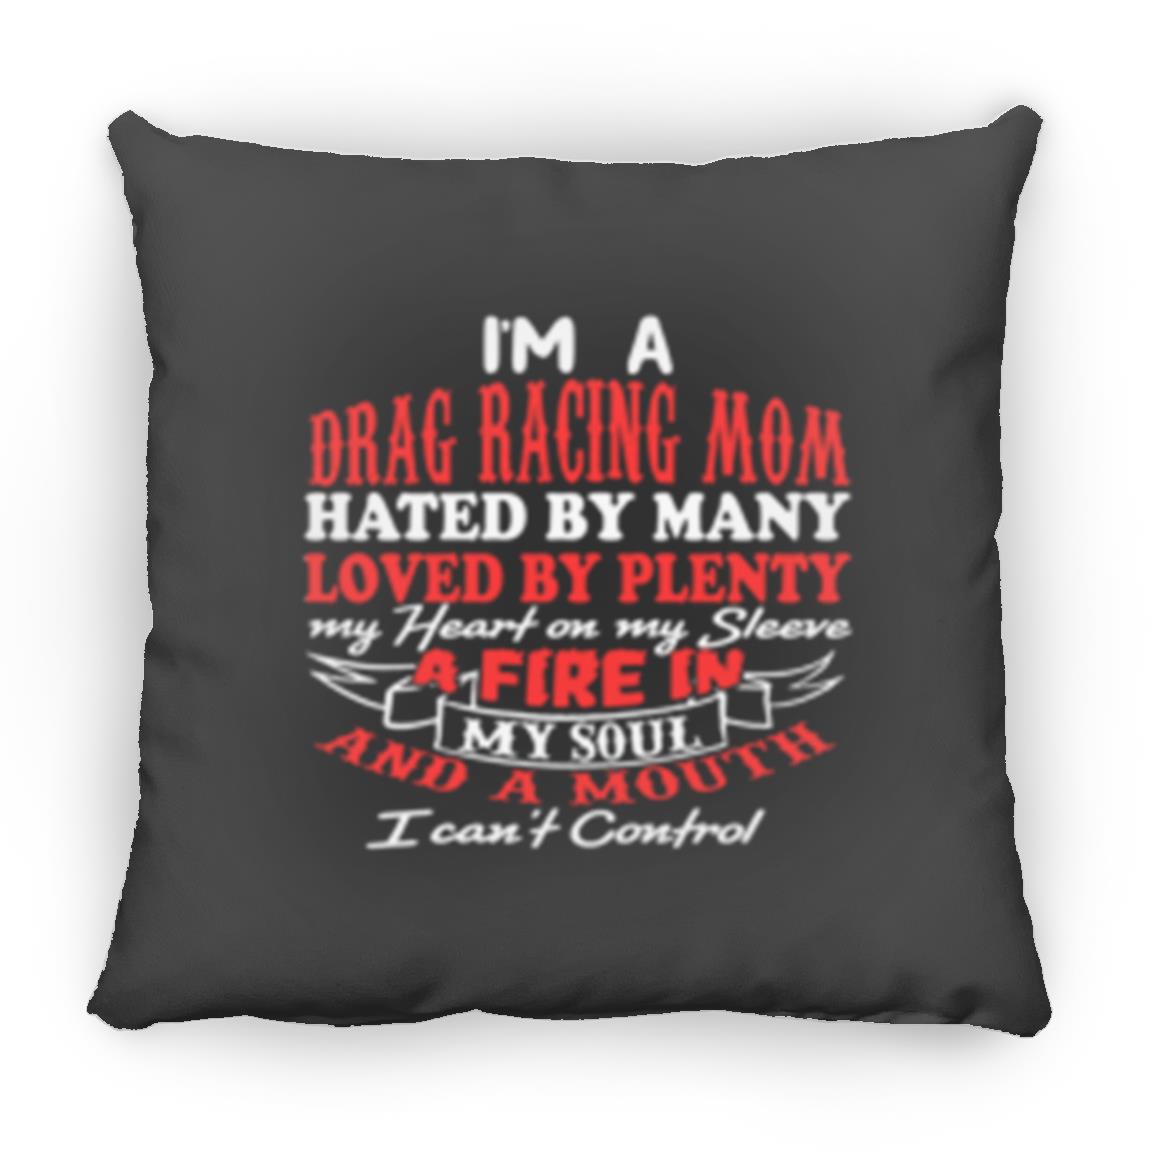 I'm A Drag Racing Mom Hated By Many Loved By Plenty Small Square Pillow